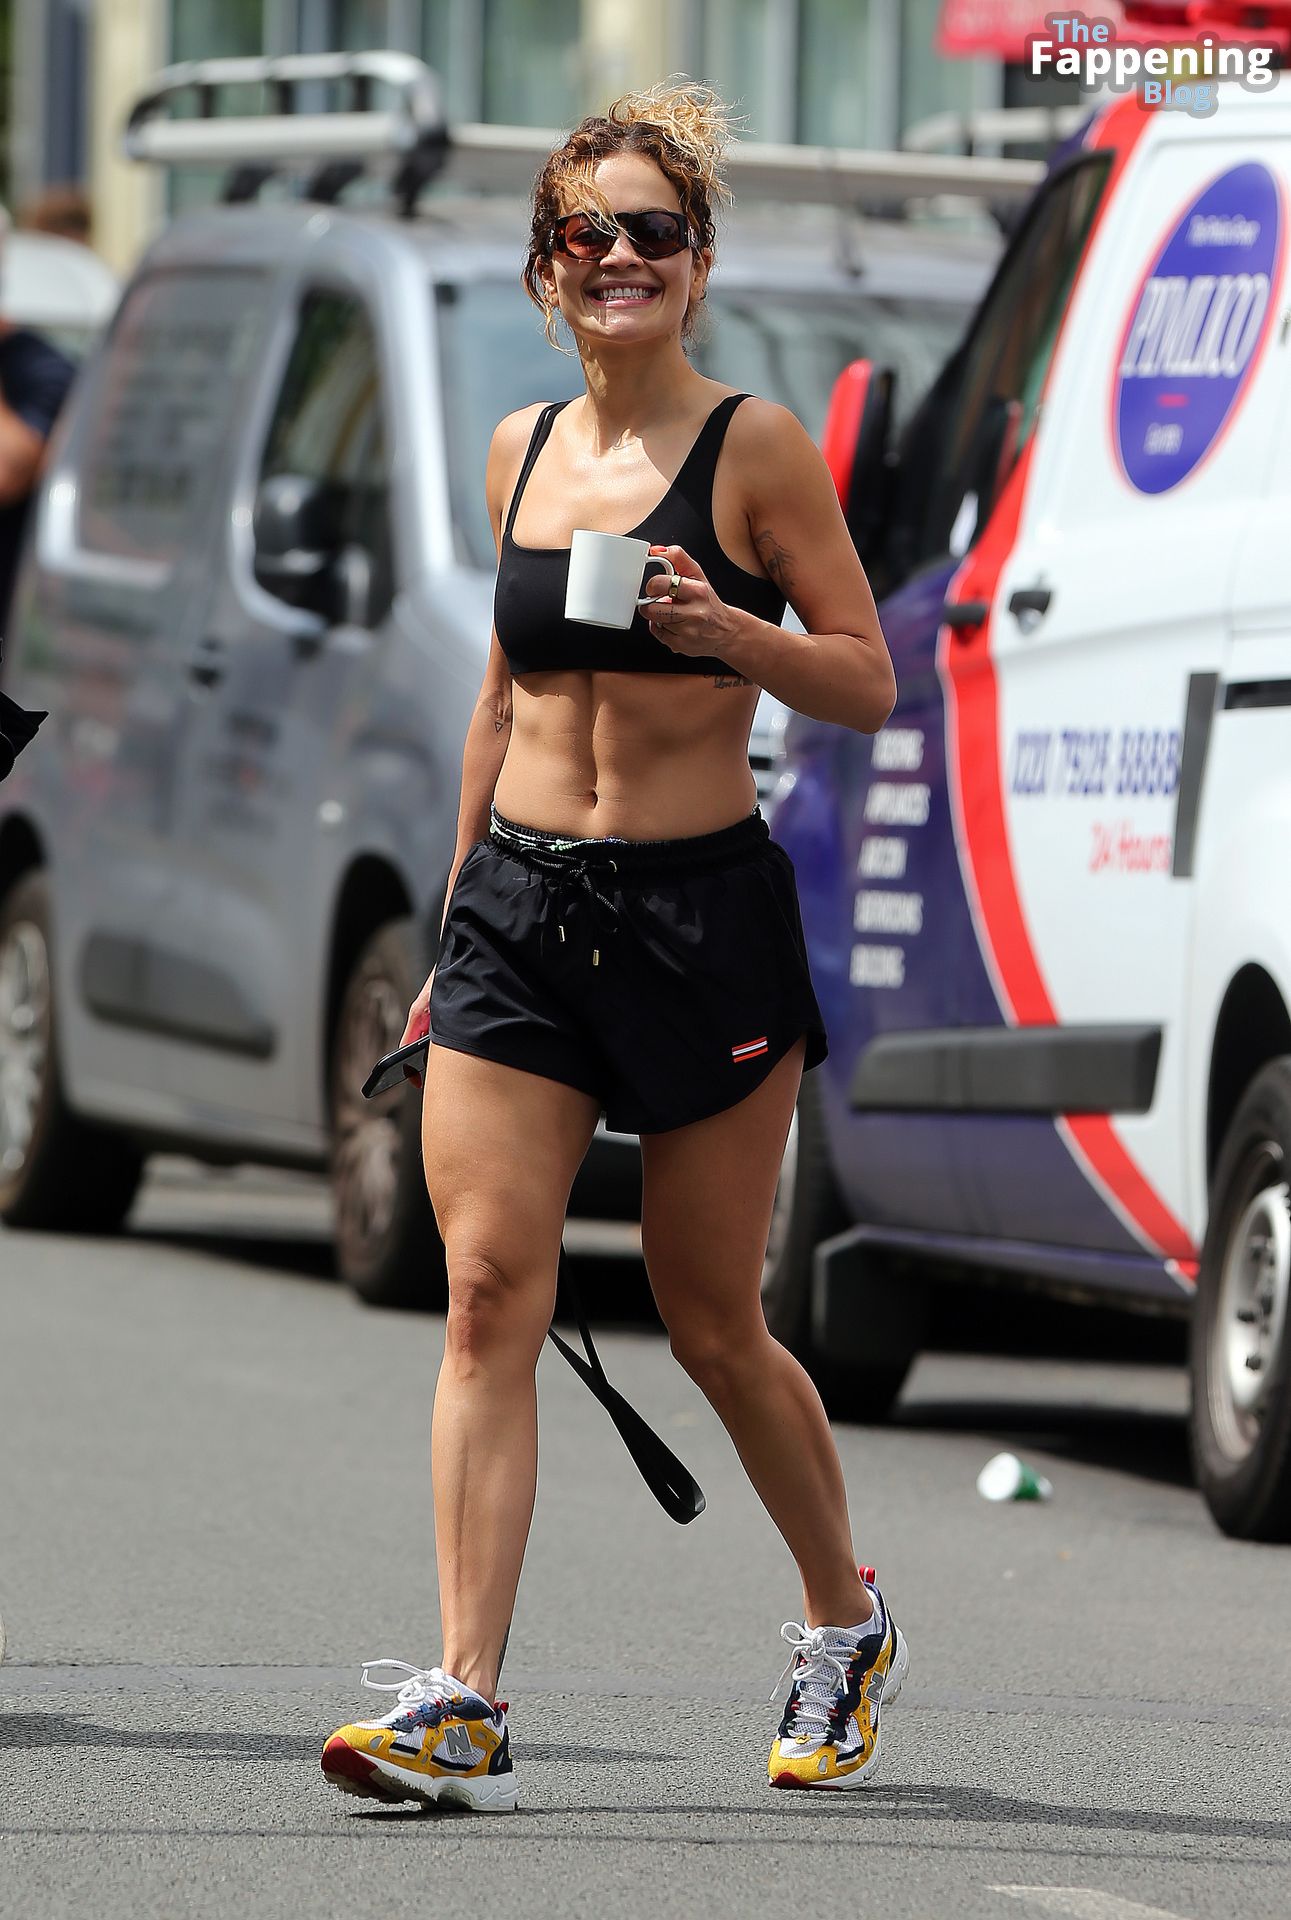 Rita Ora Looks Toned As She Leaves a London Gym Wearing a Sports Bra and Tiny Black Shorts (28 Photos)